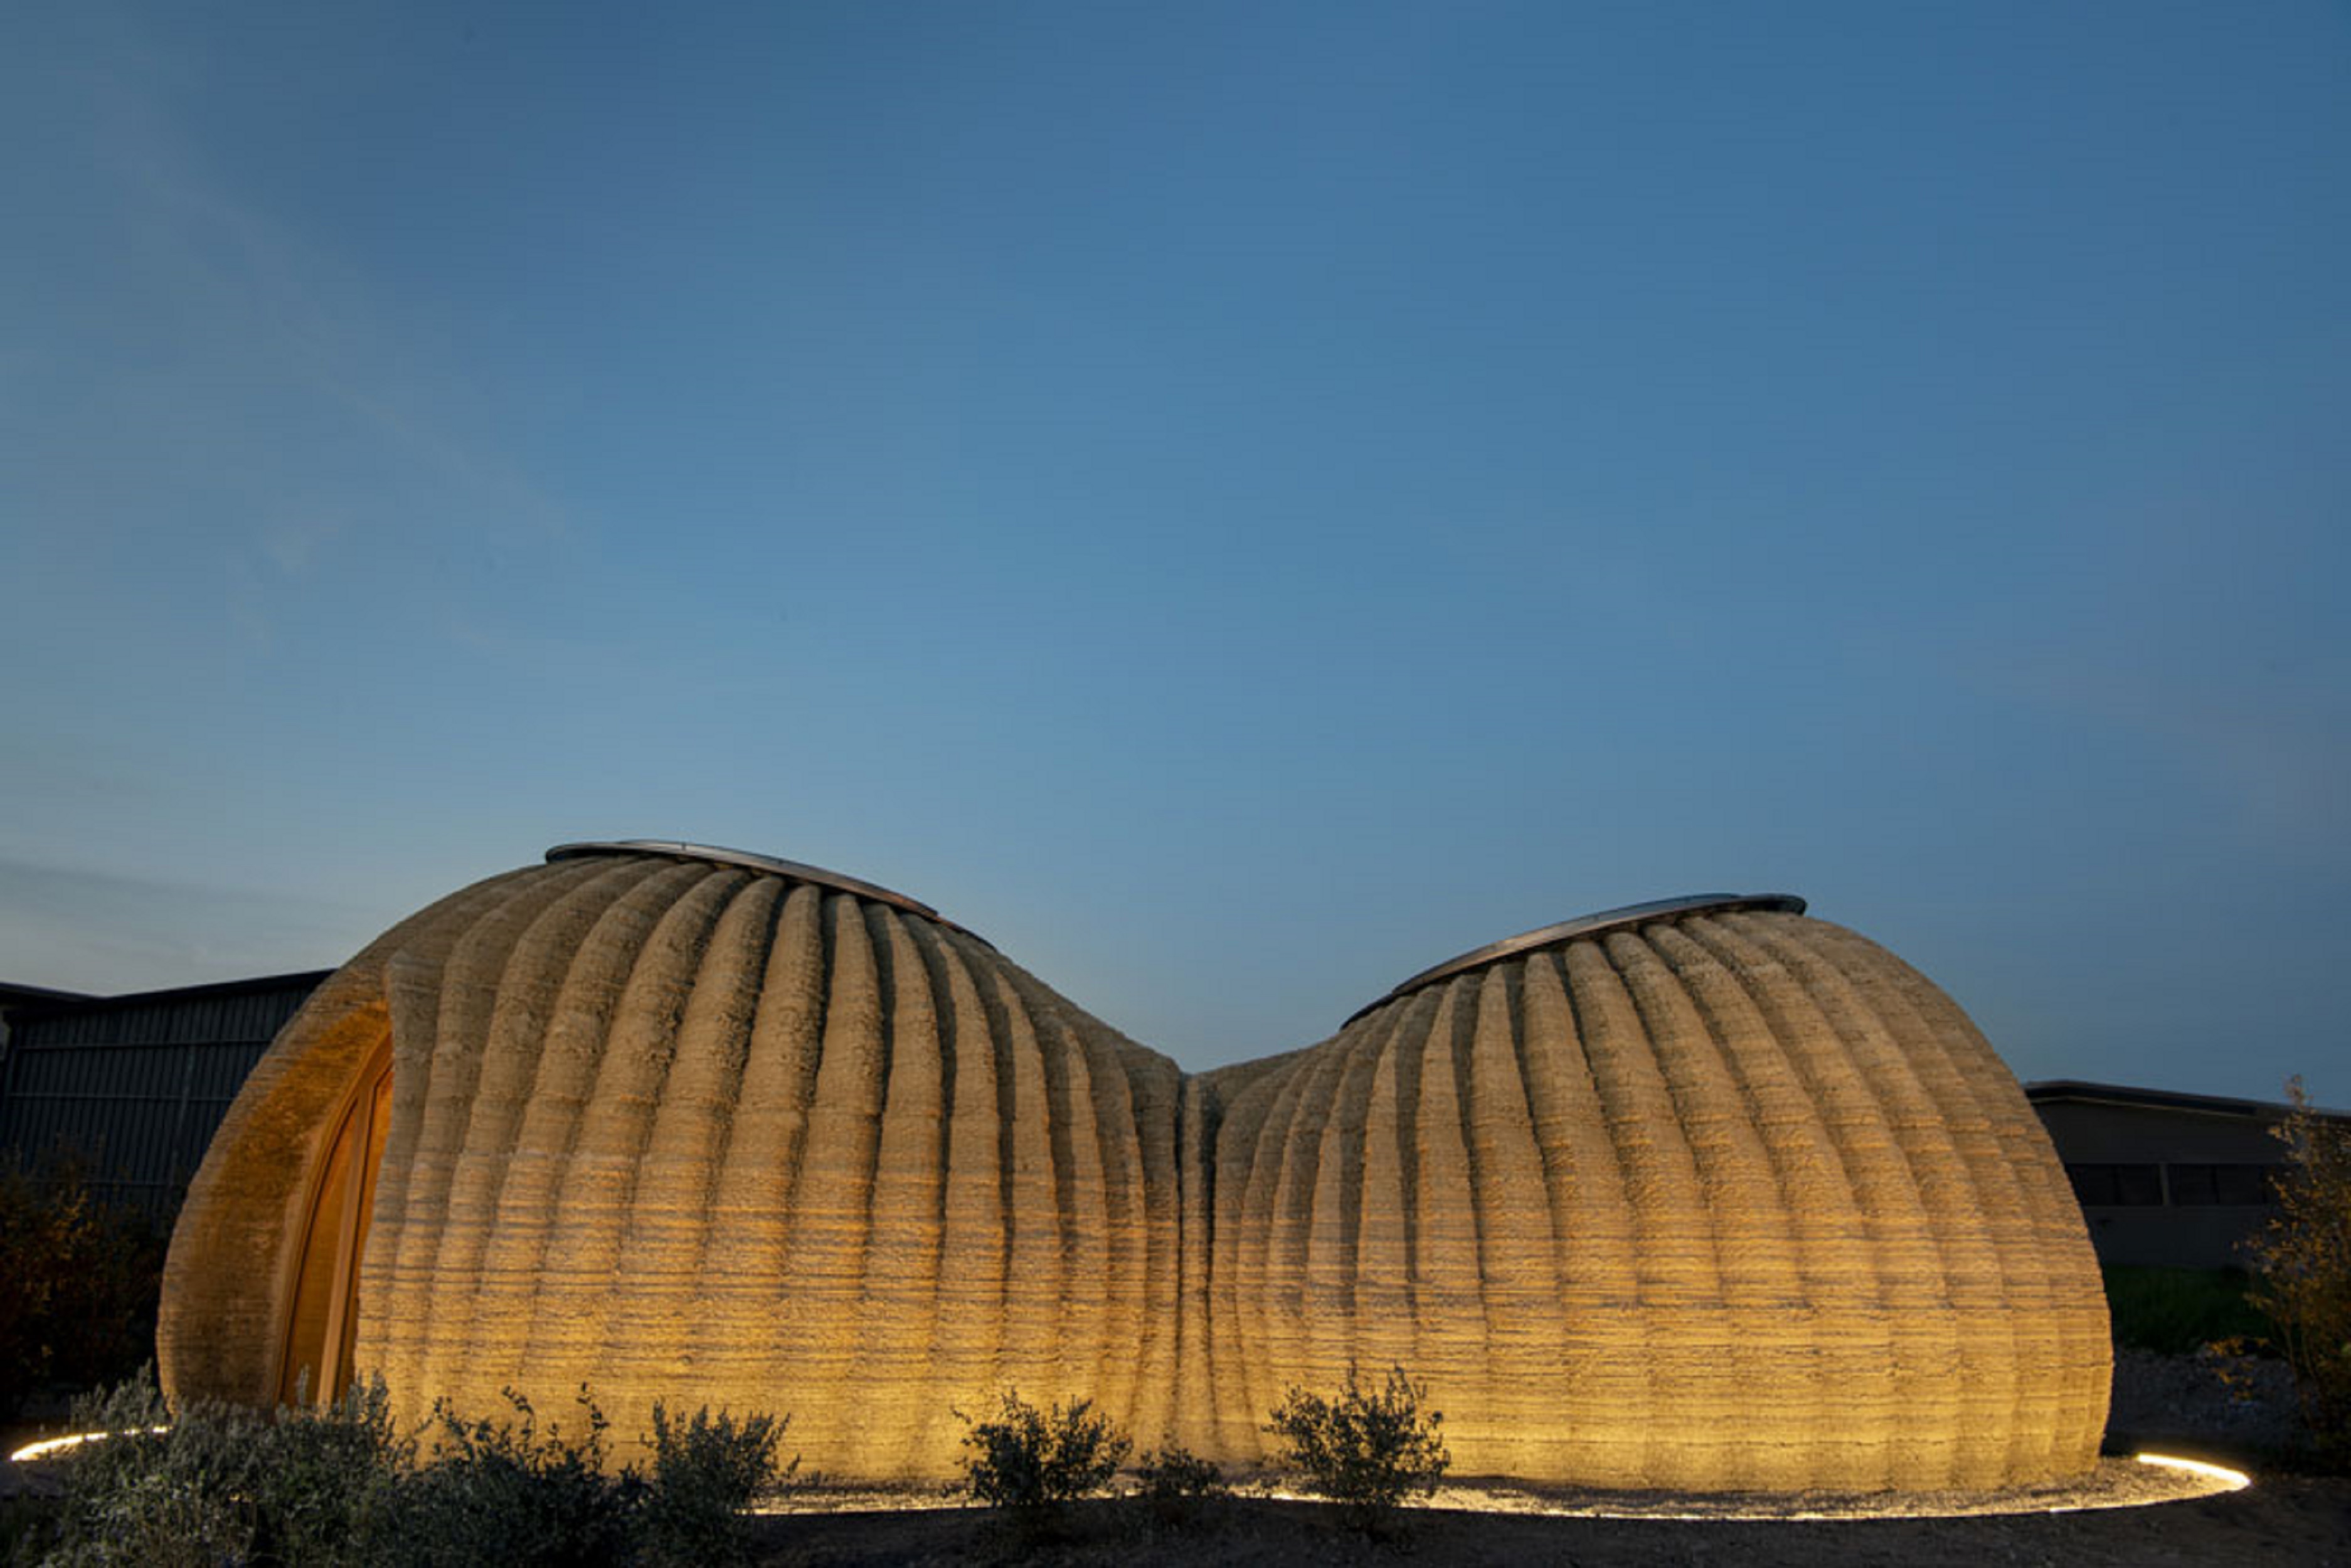 The architectural wonders of eco-sustainability